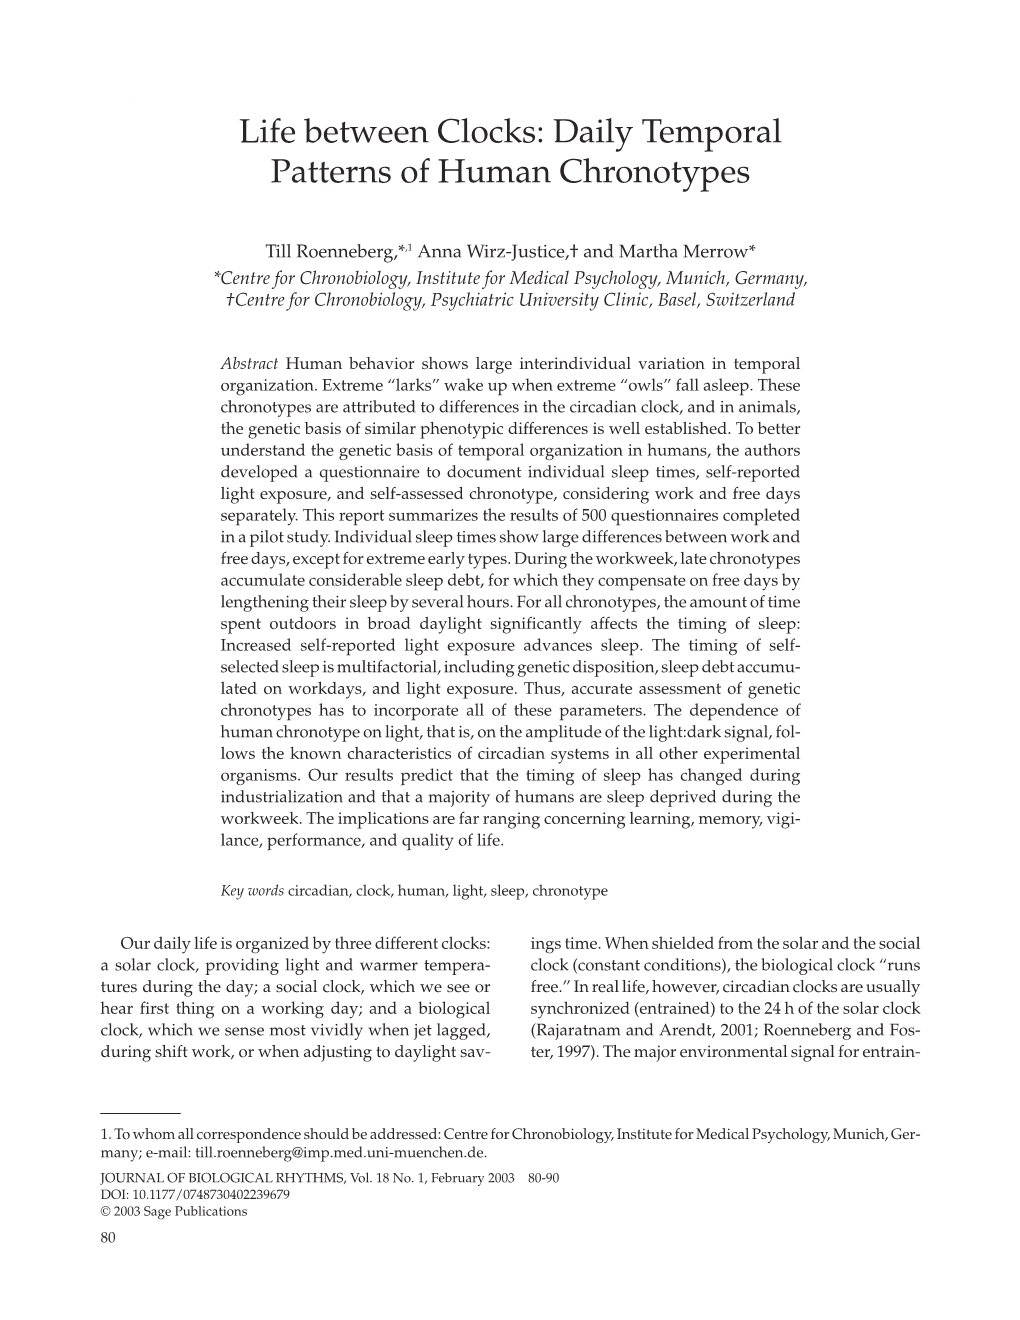 Life Between Clocks: Daily Temporal Patterns of Human Chronotypes